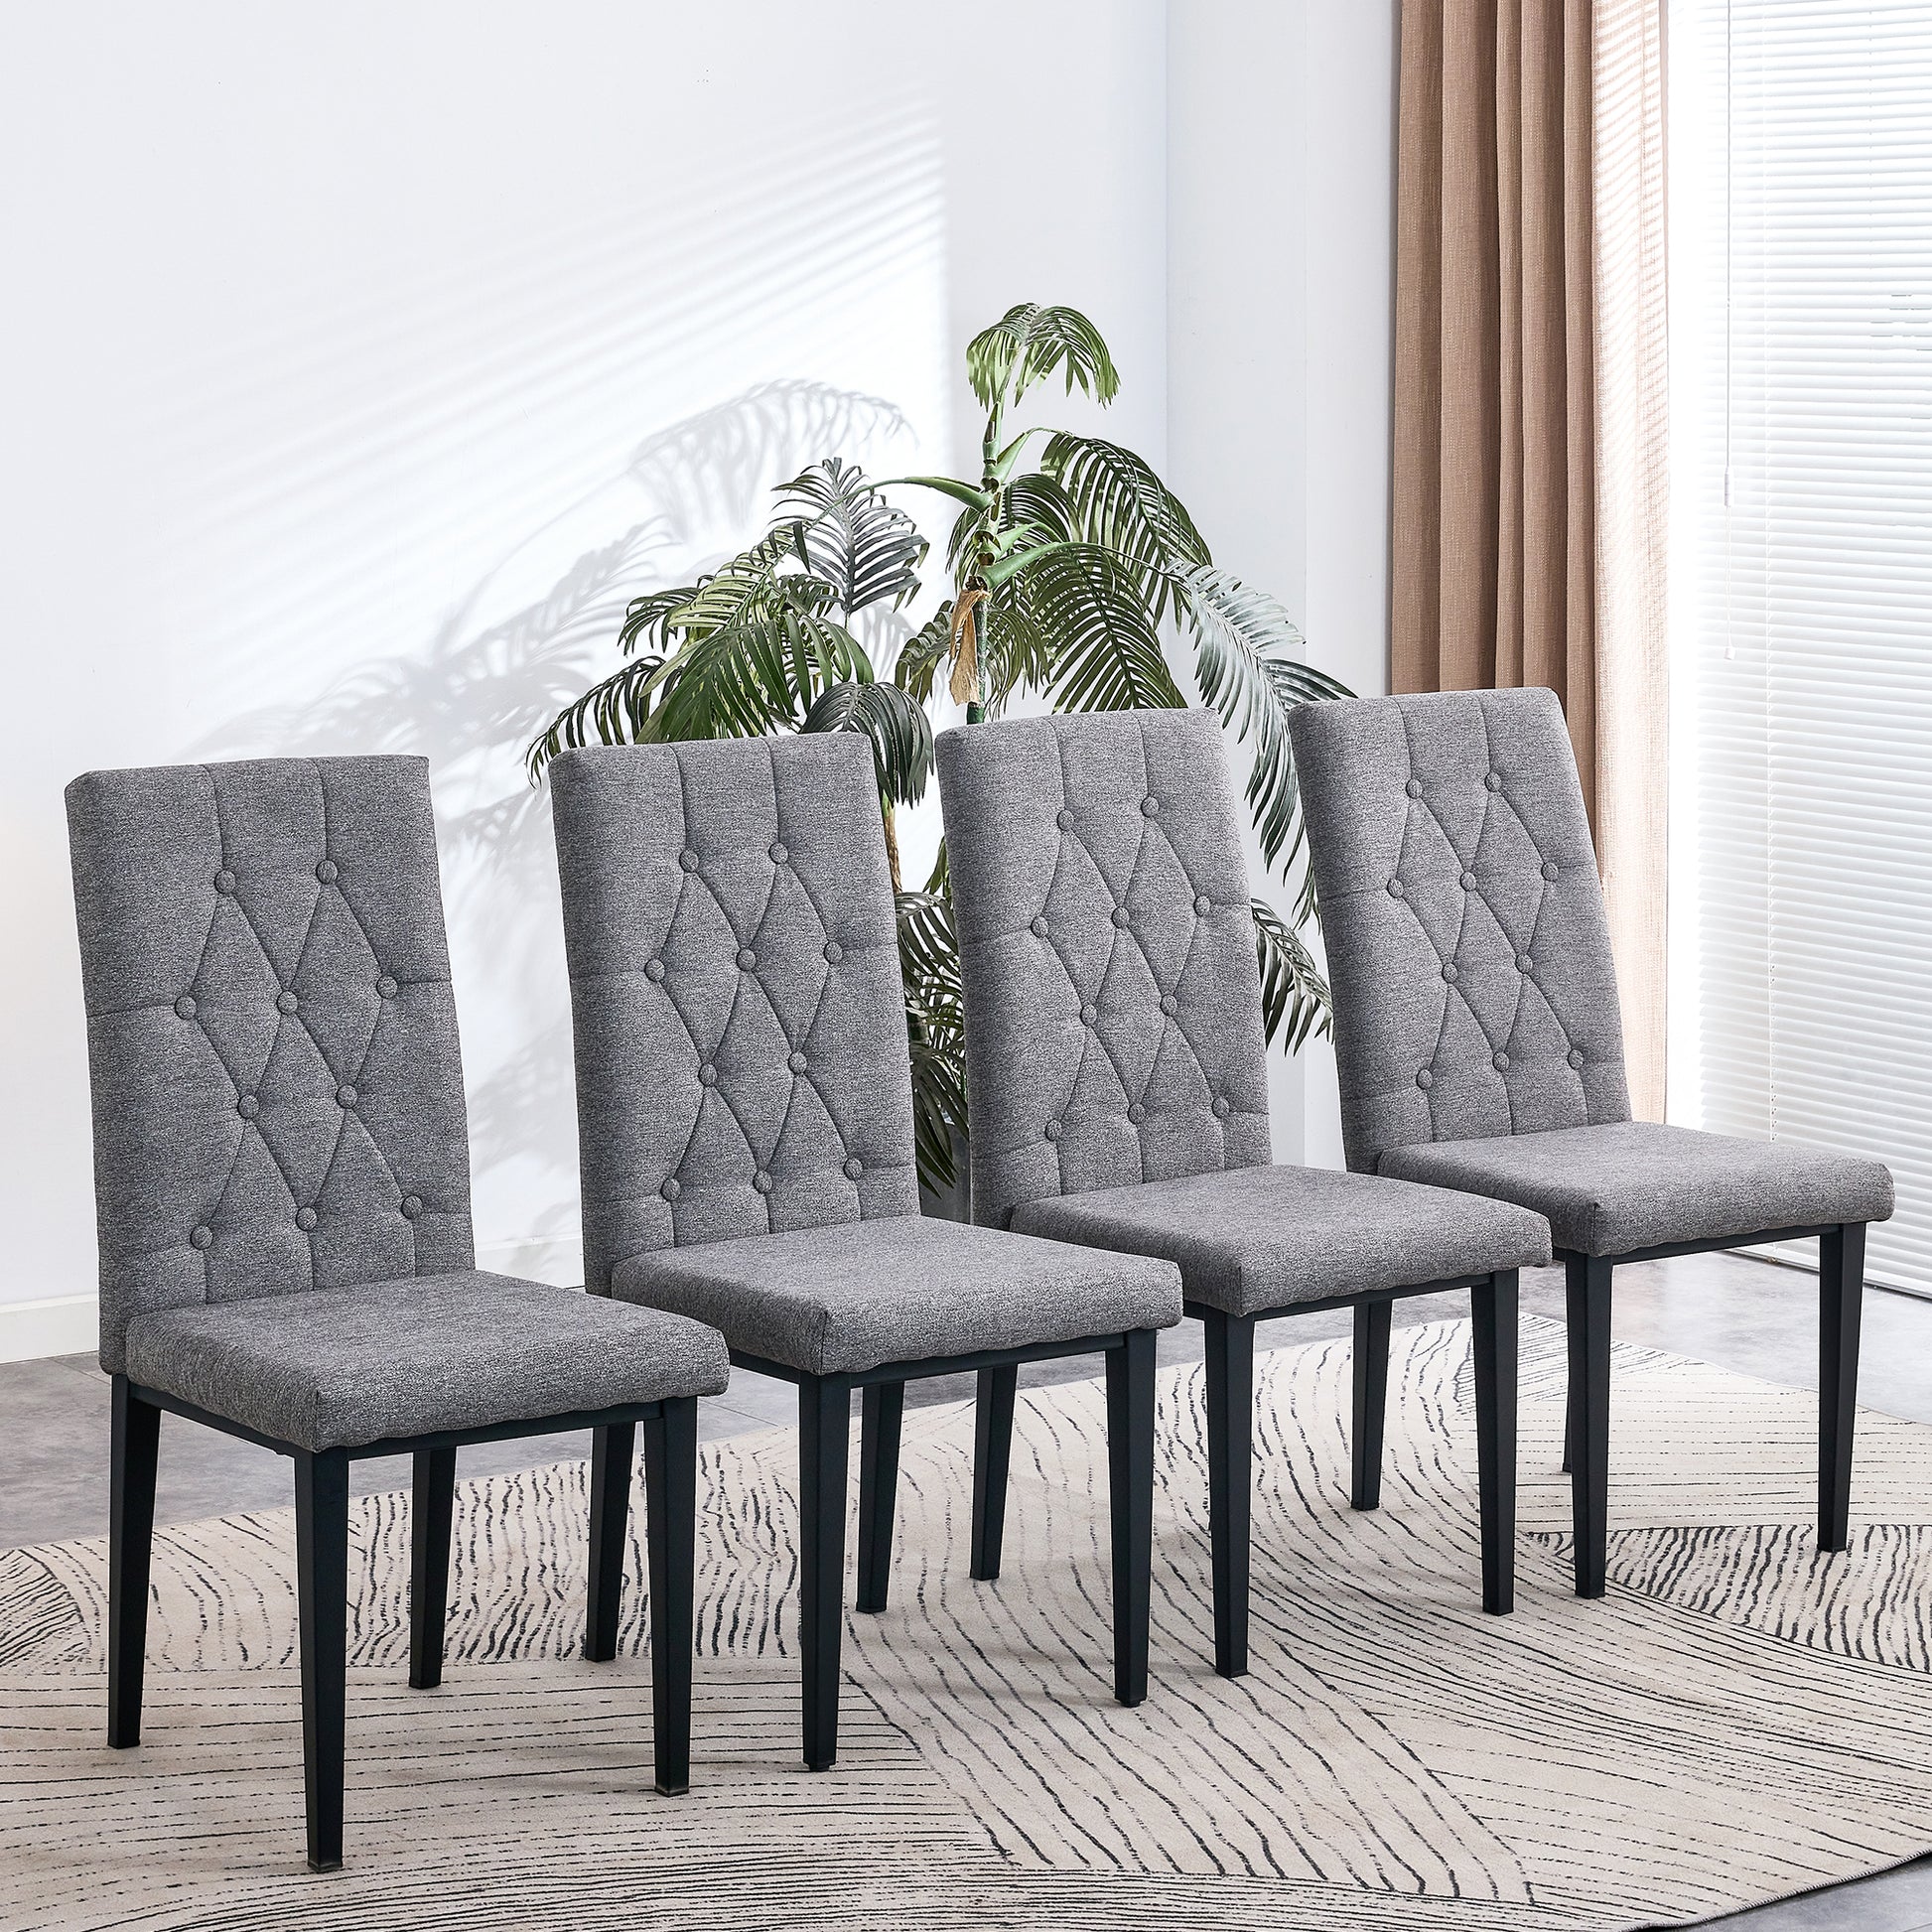 63" Modern Style 6 piece Dining Table with 4 Chairs & metal-gray-modern-rectangular-mdf-mdf